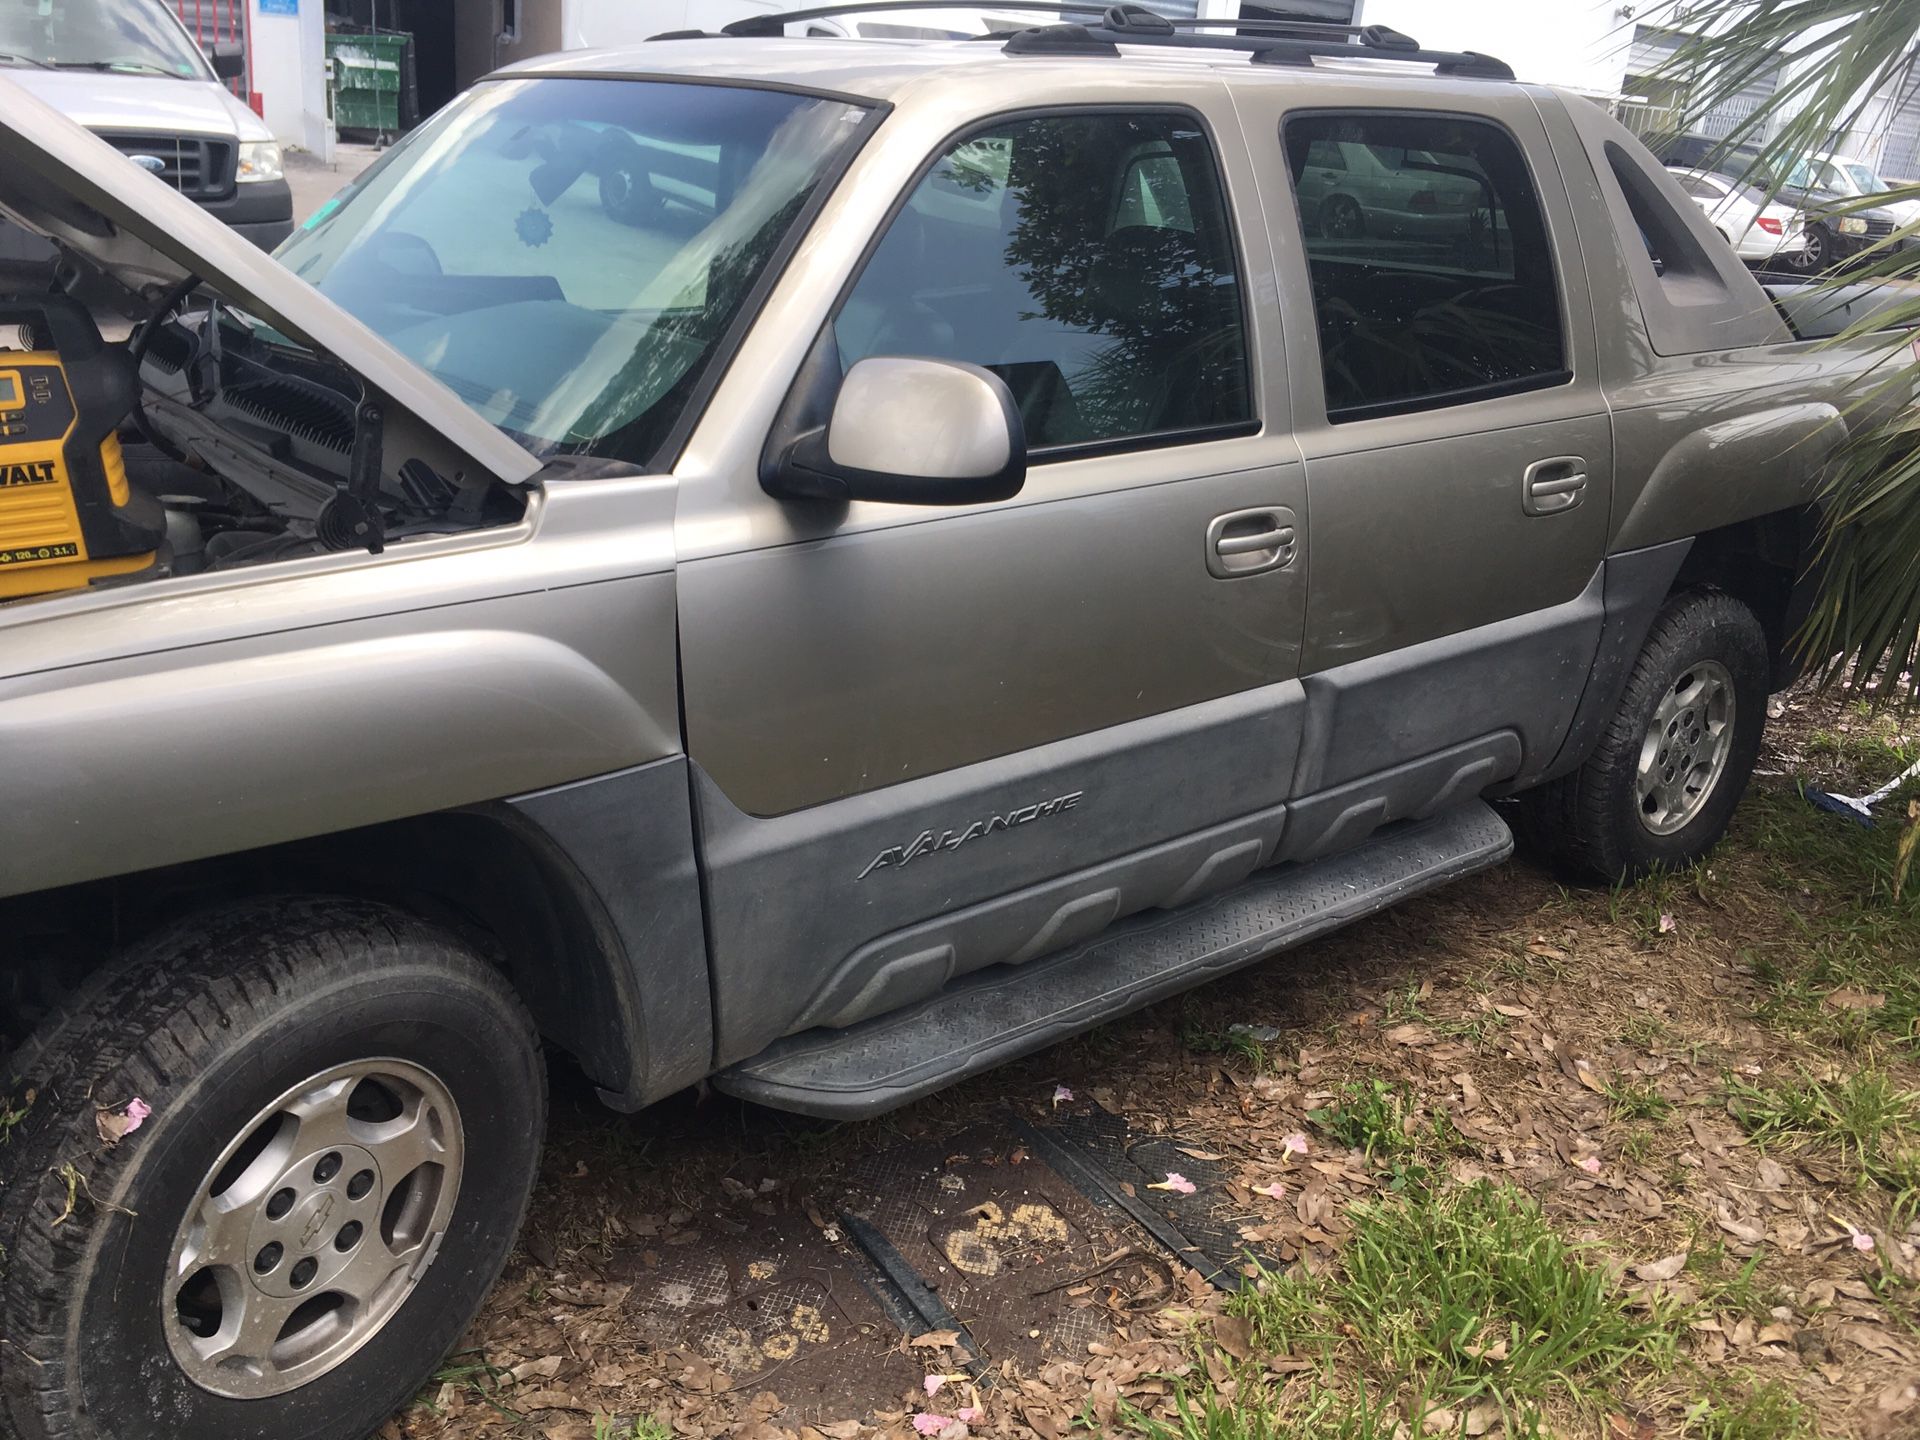 Parts for 02-06 Chevy avalanche , complete 5.3 LS swap , wheels, black leather interior, etc.